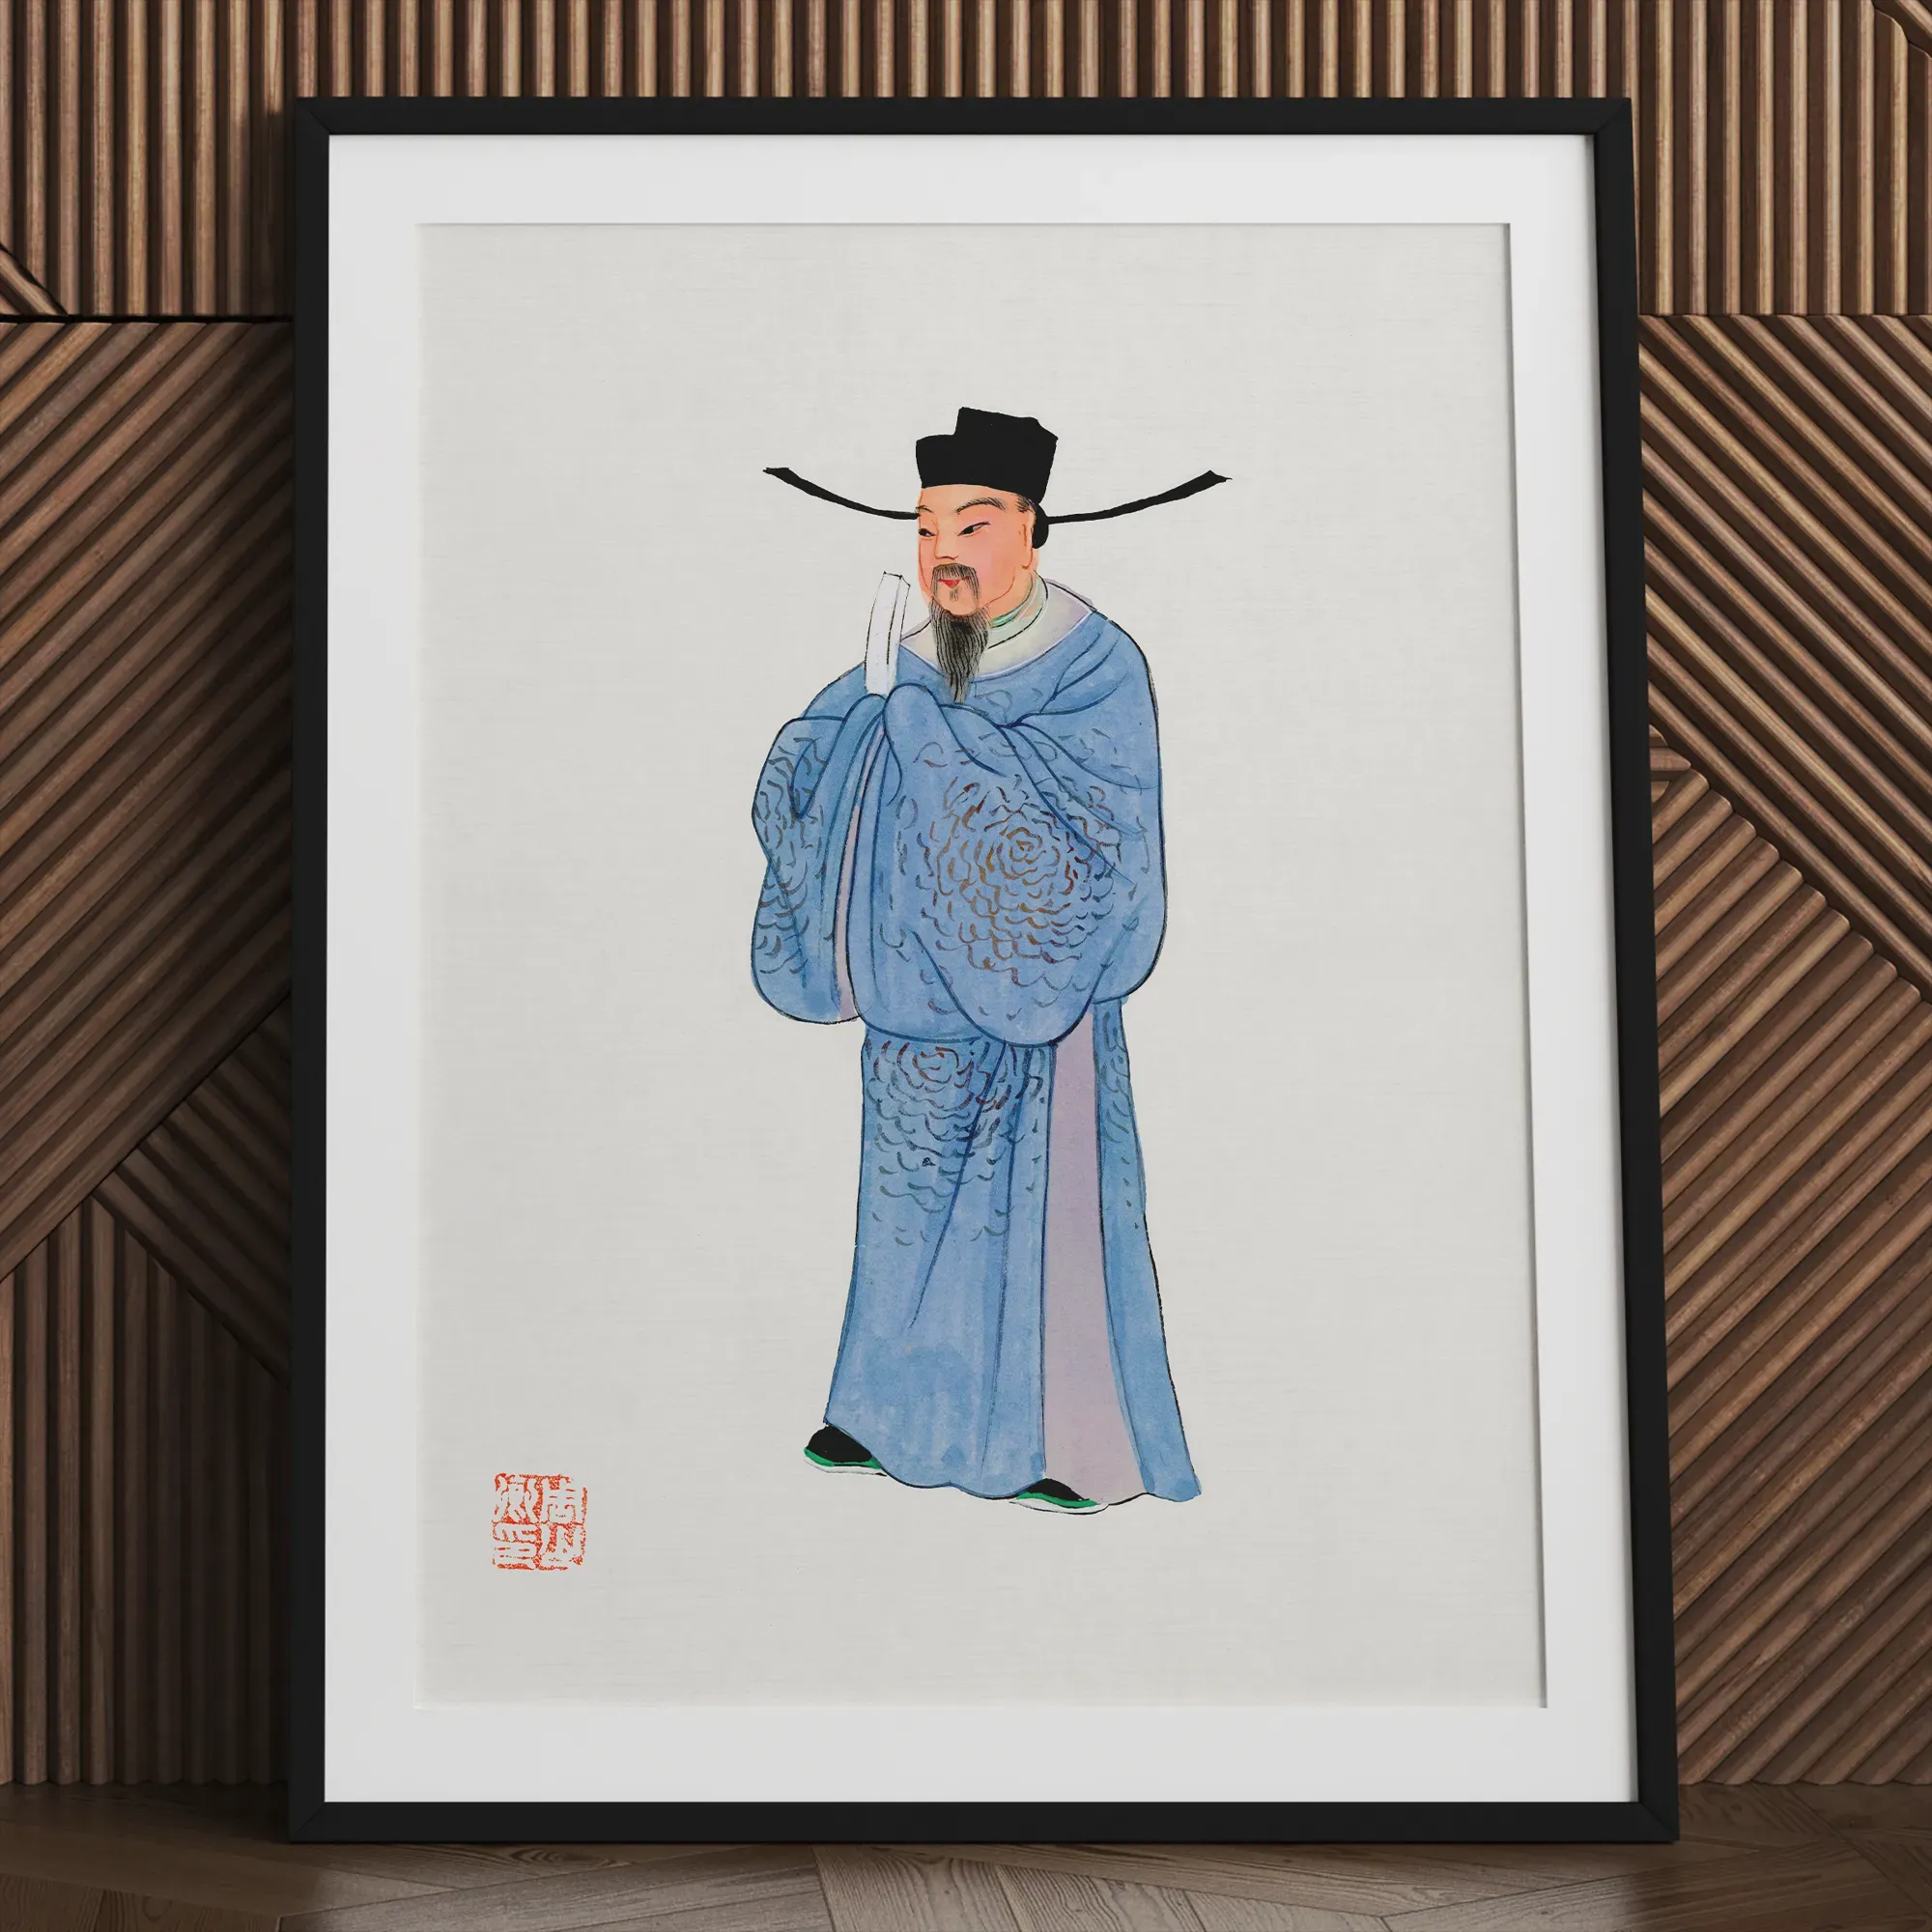 Chinese Official Framed & Mounted Print - Posters Prints & Visual Artwork - Aesthetic Art